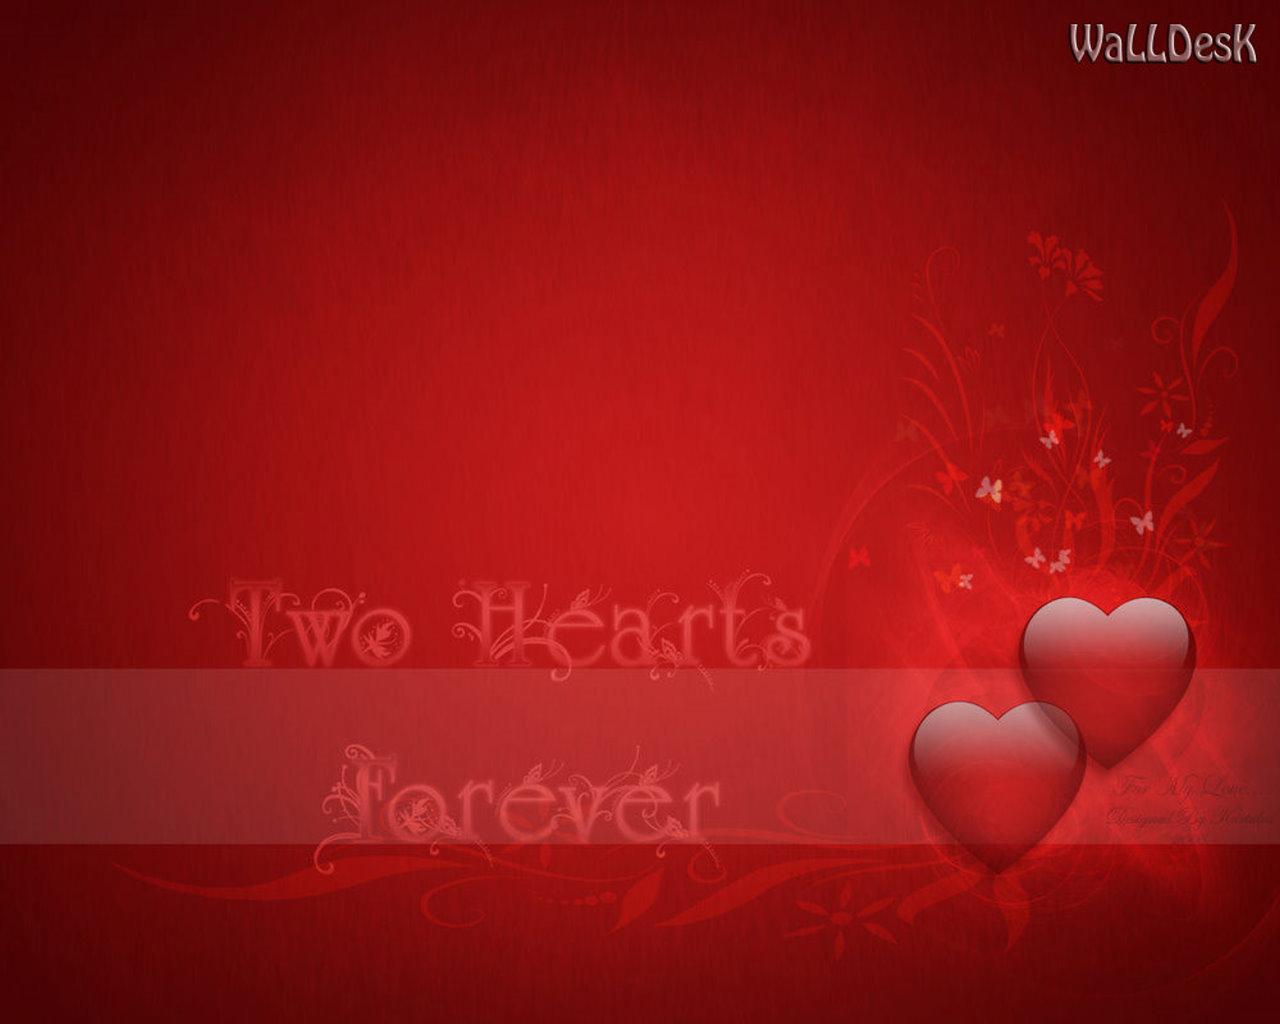 wallpaper dia dos namorados,heart,red,valentine's day,love,text